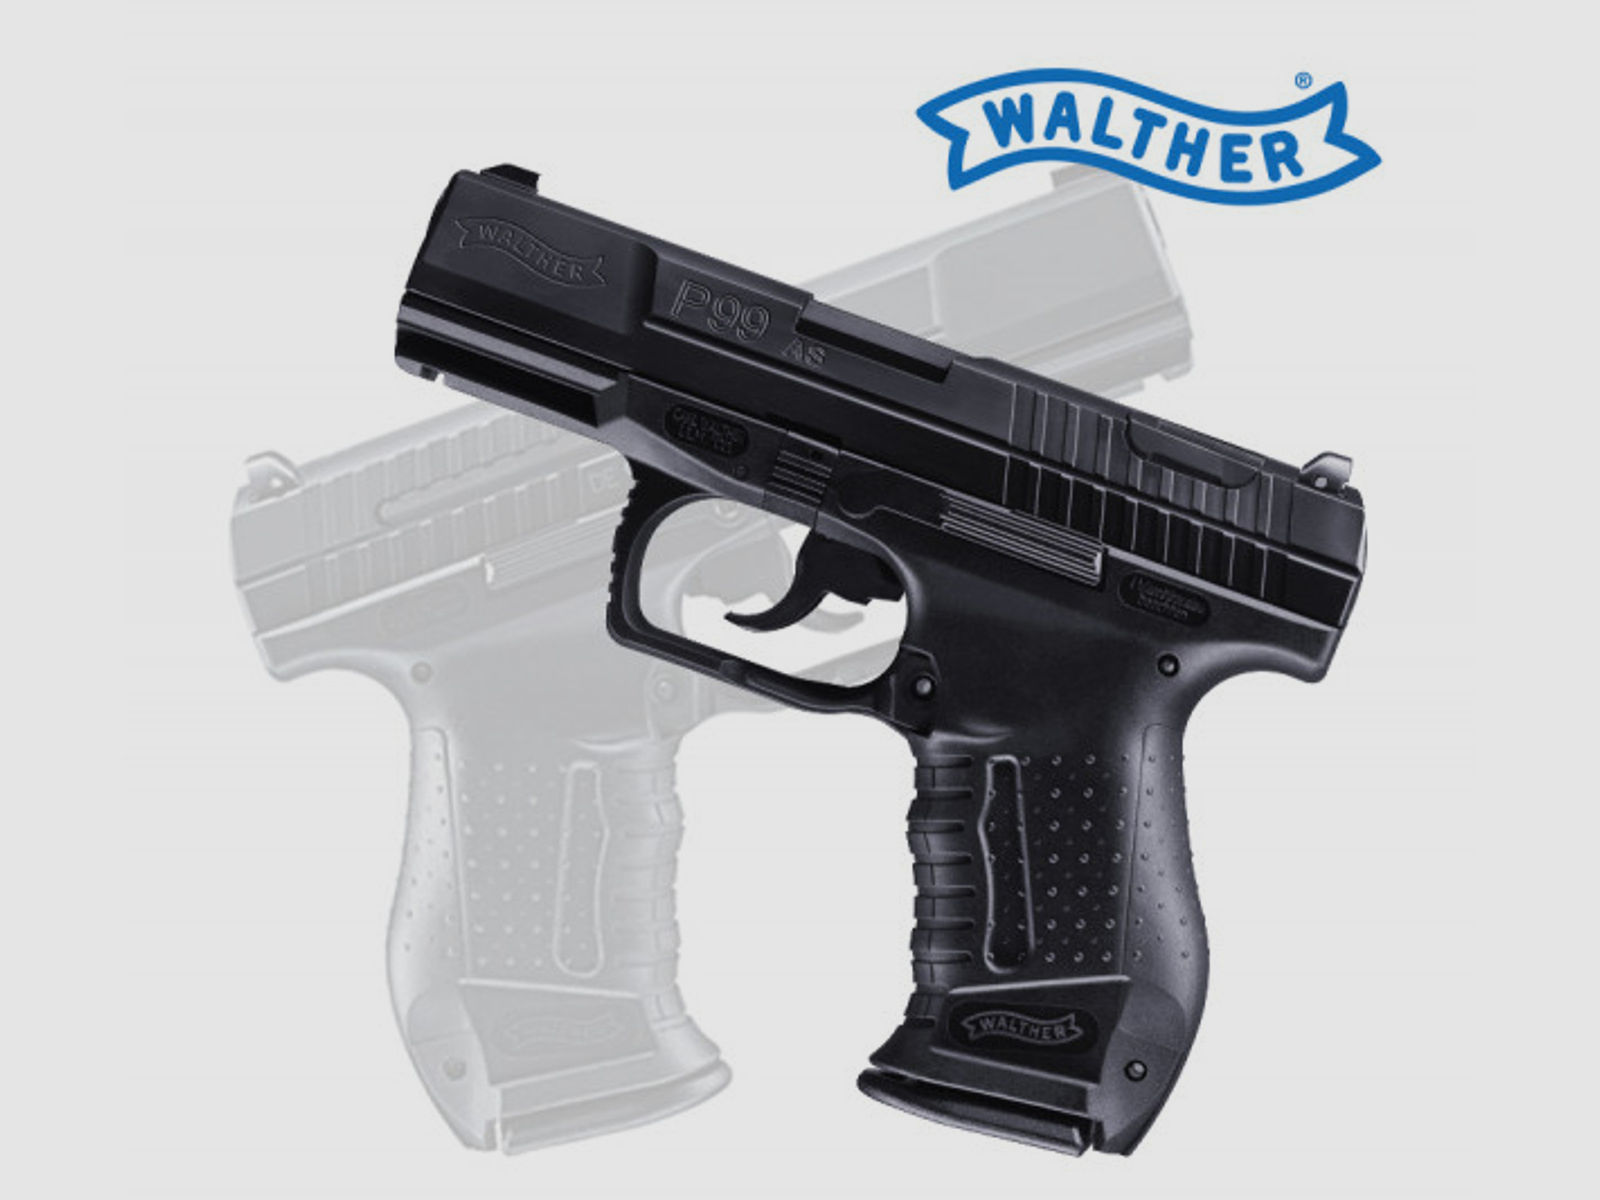 Walther P99 AS 9mm Selbstladepistole 2689421